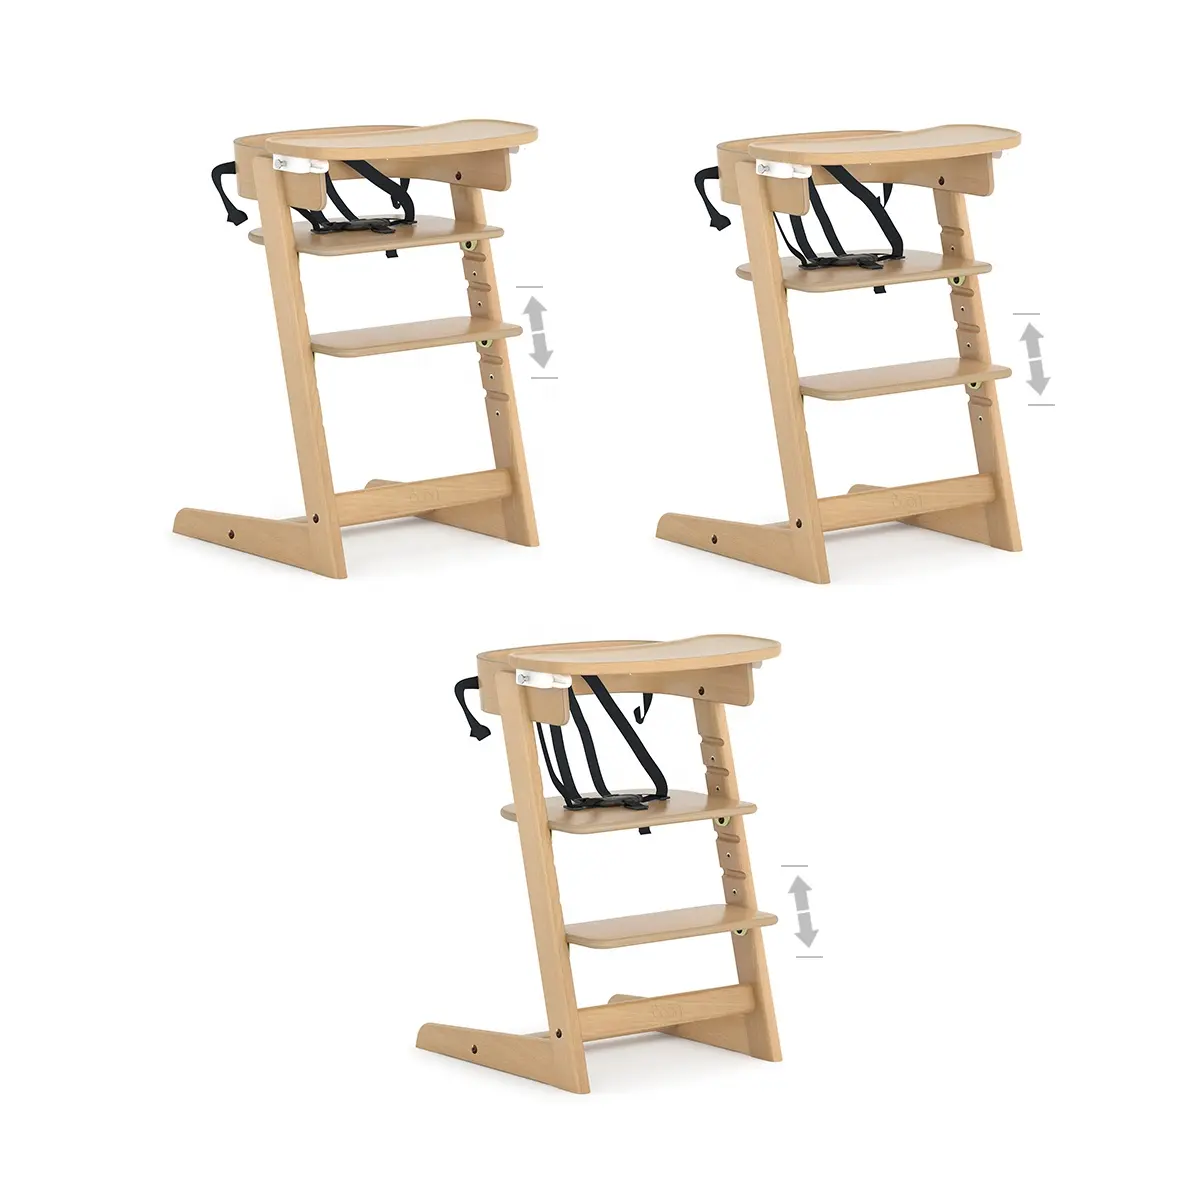 OBM Multi Function 2 In 1 Small Wooden Feeding Dining High Chair For Baby